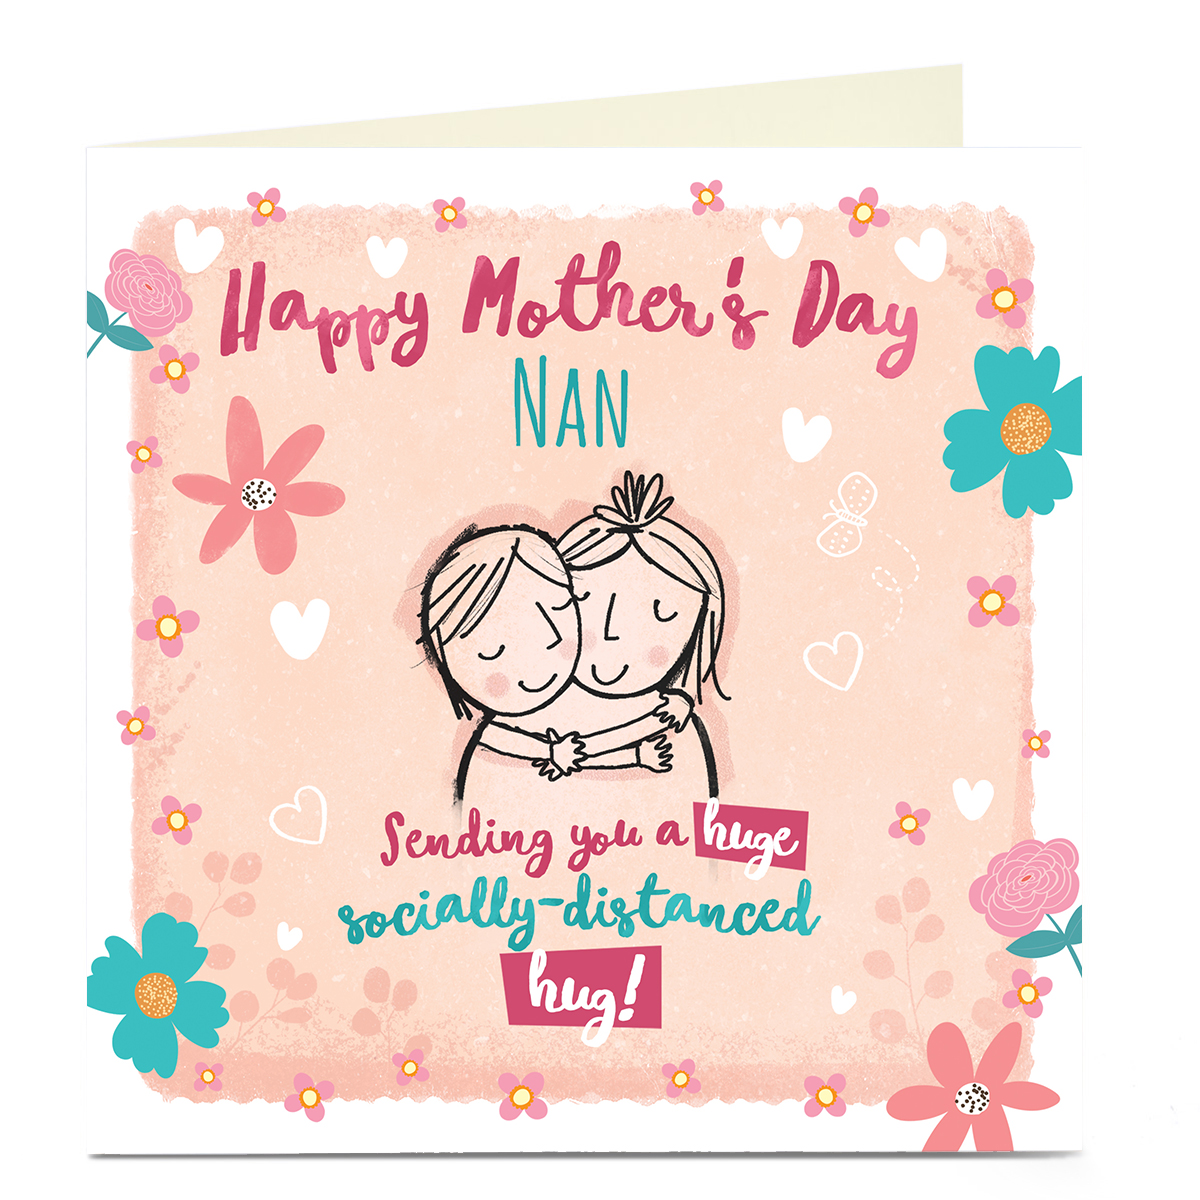  Personalised Mother's Day Card - Socially-Distanced Hug!